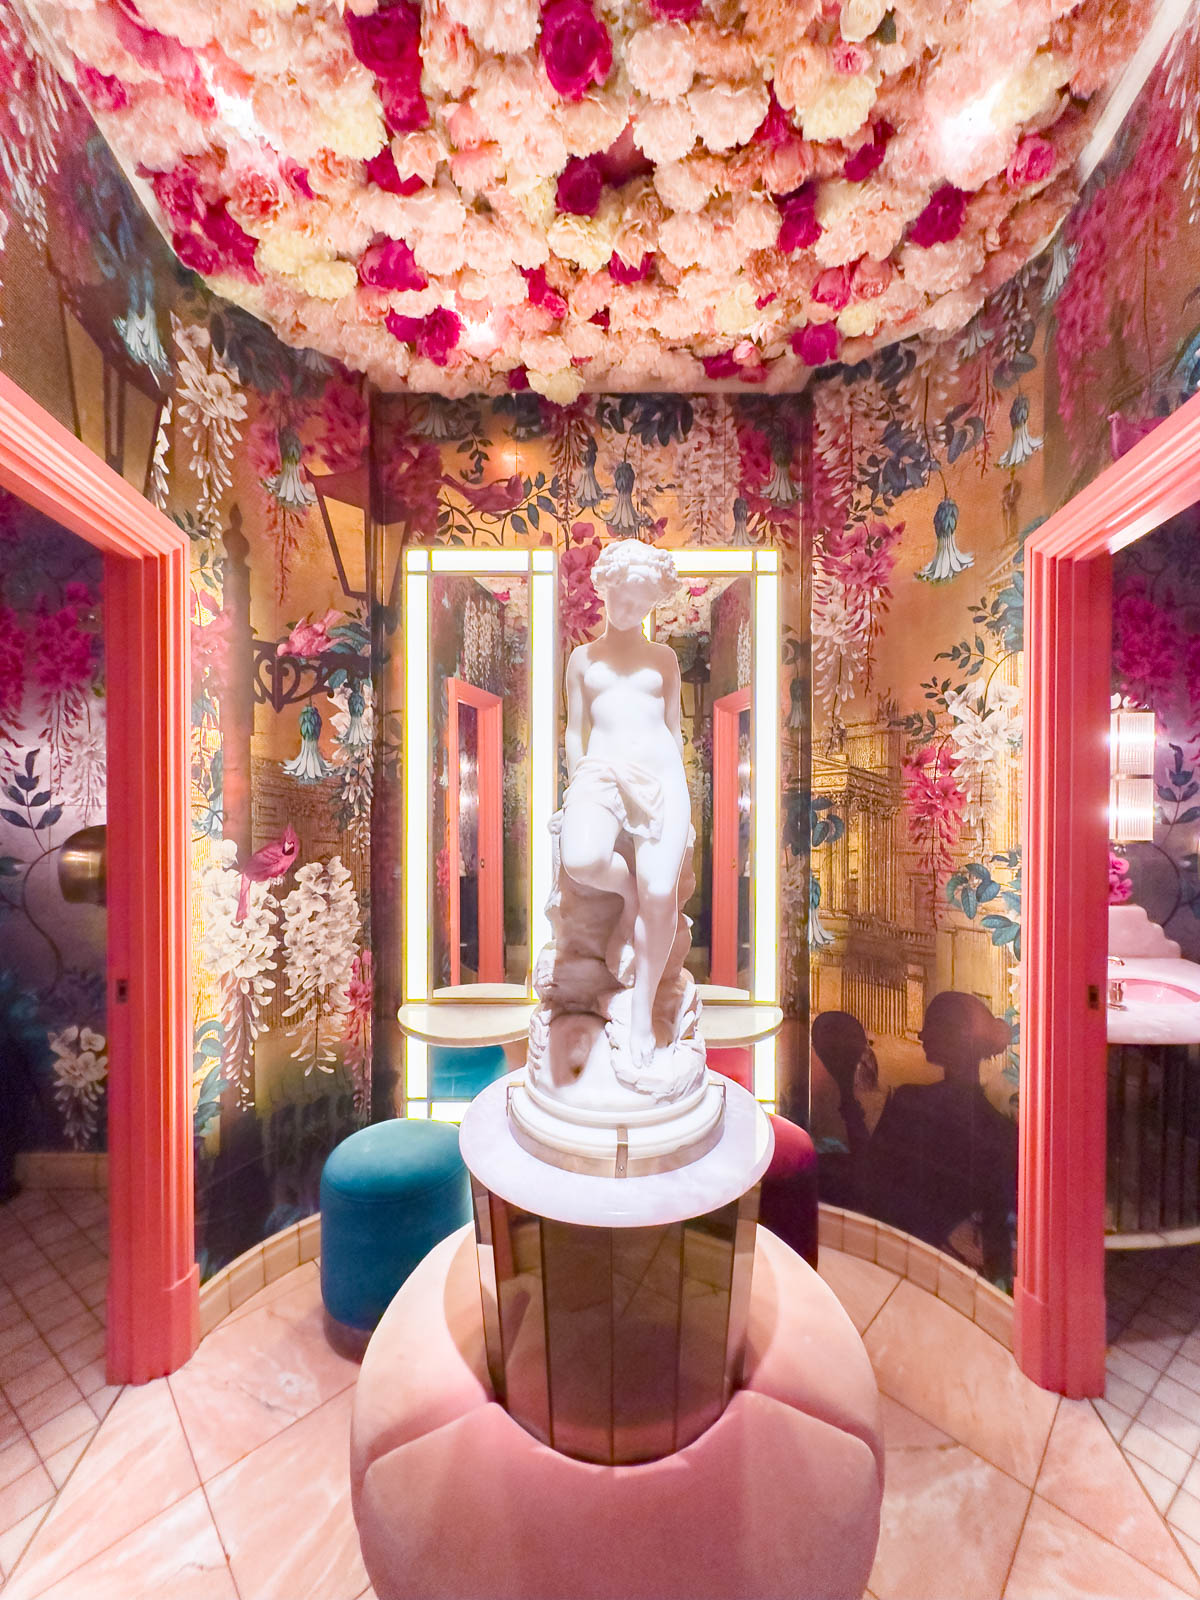 The Ivy bathroom is pink and covered in flowers.